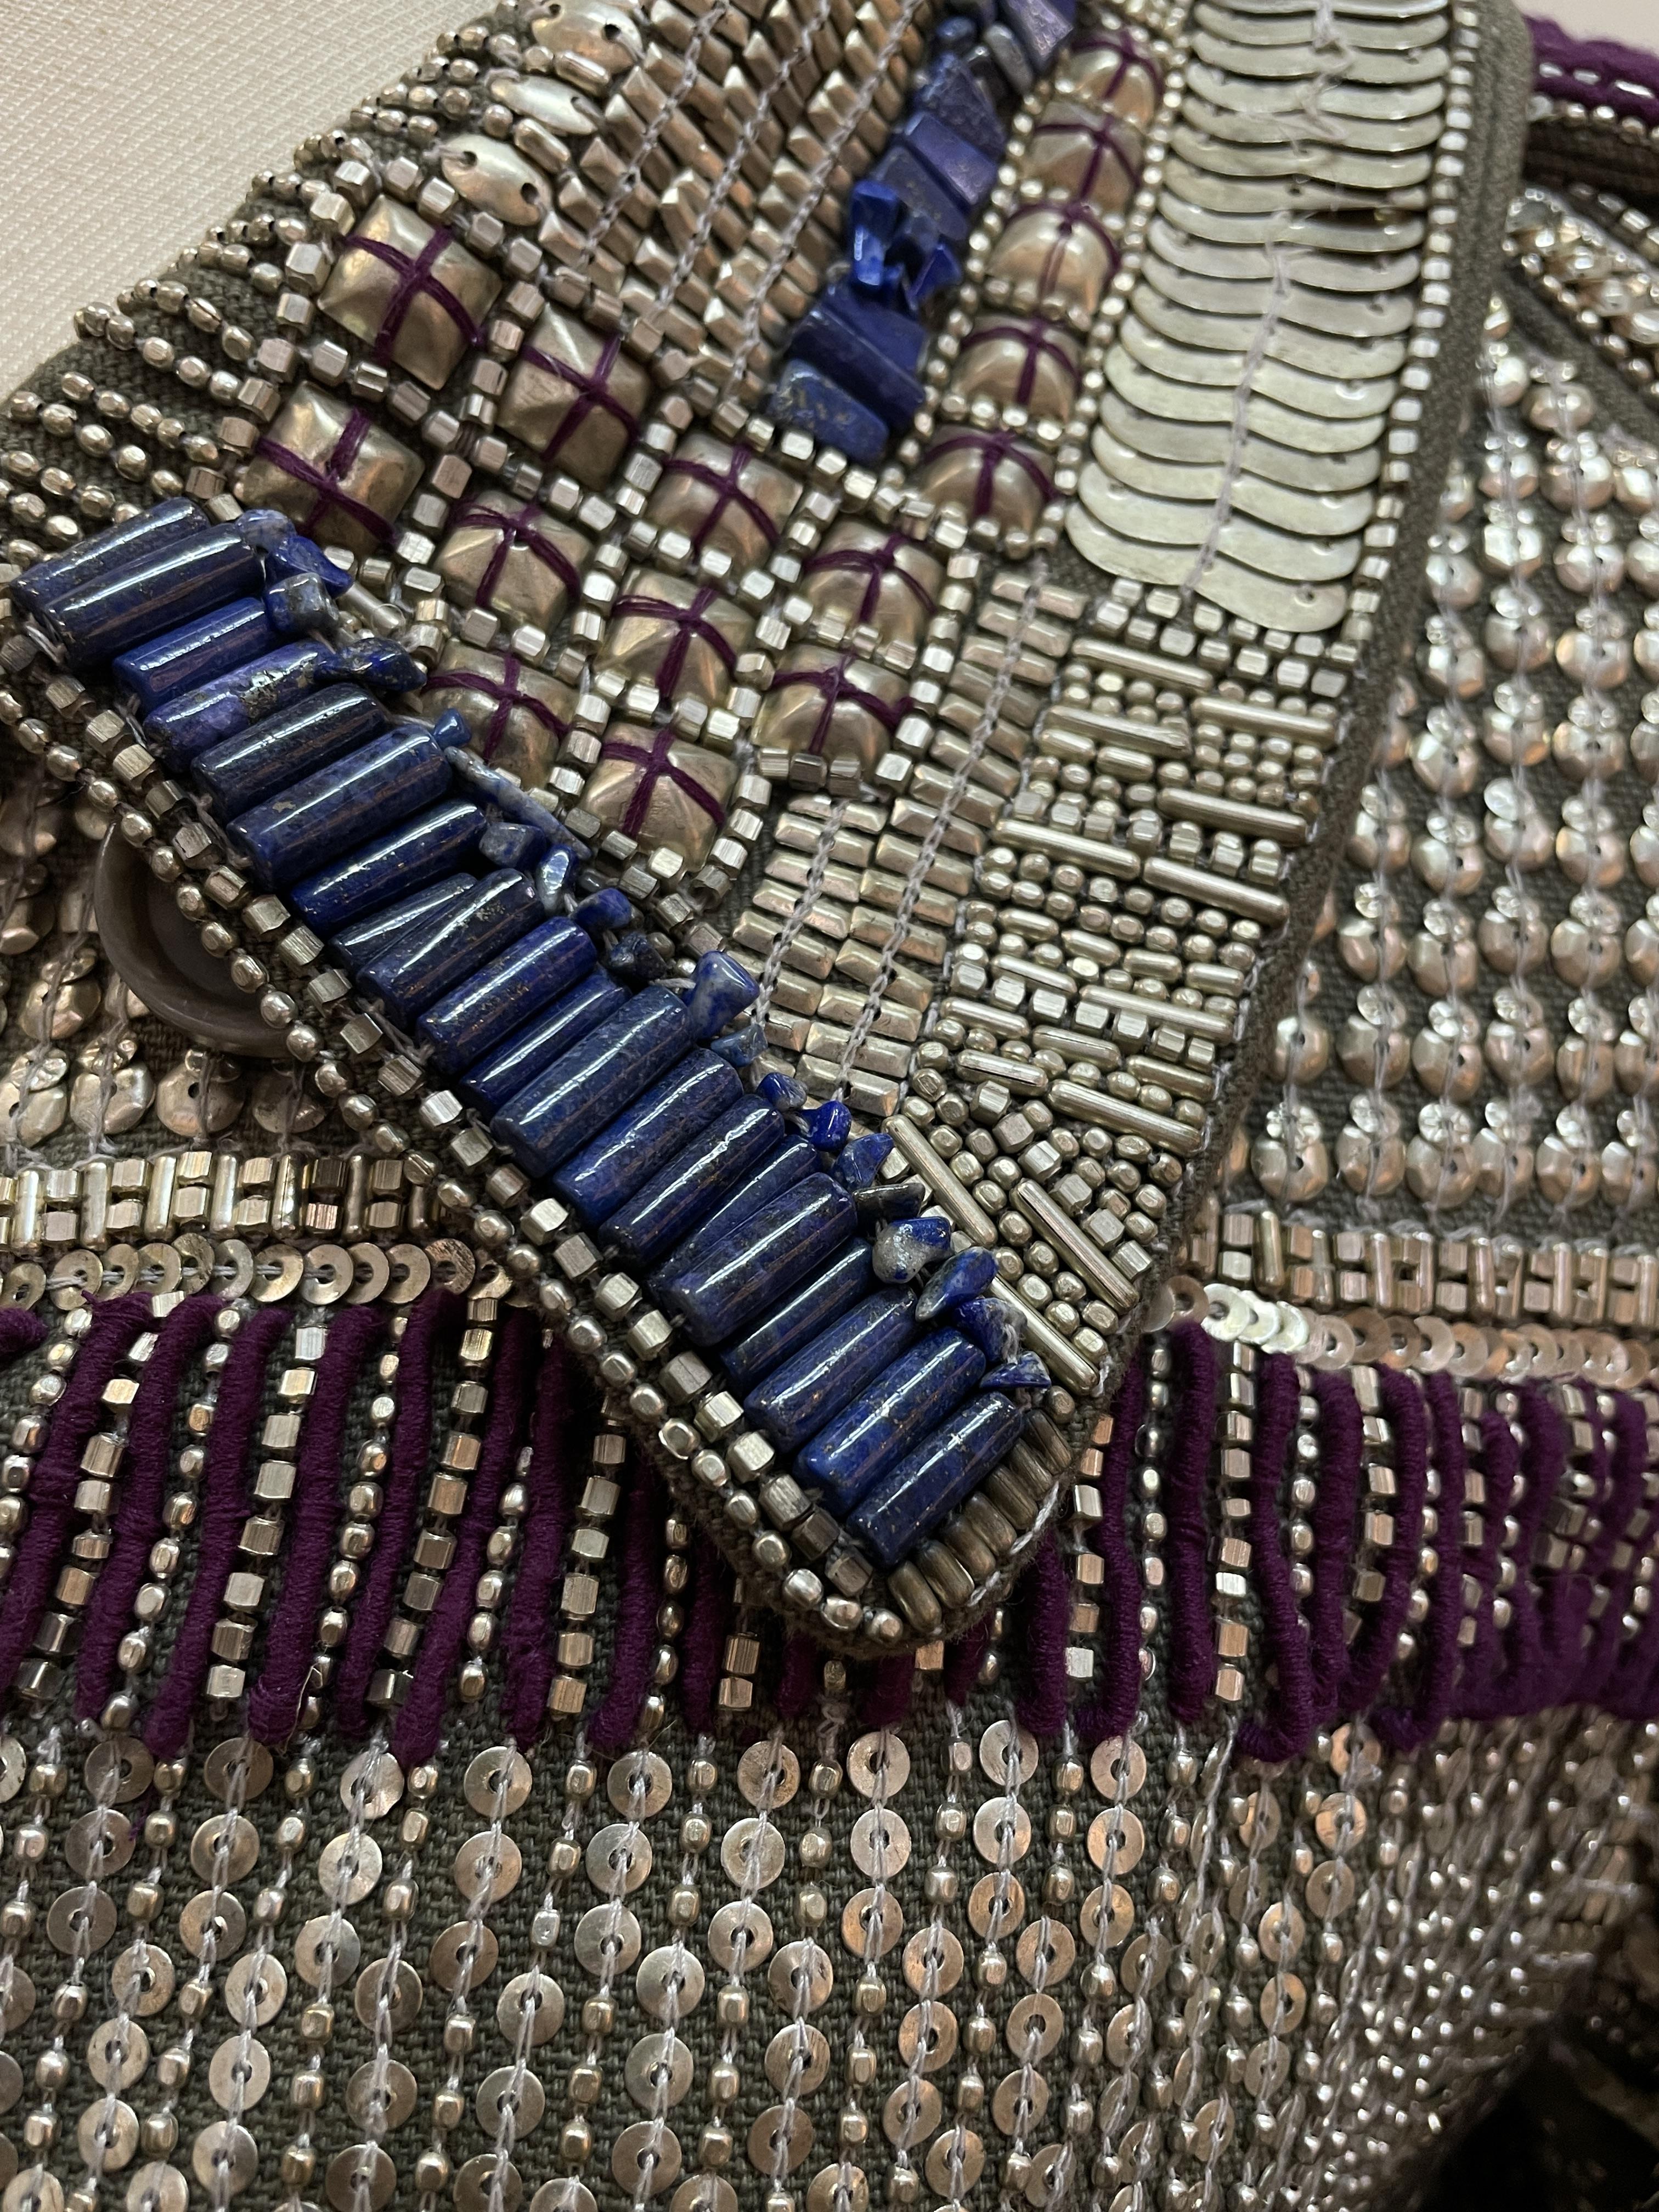 A DRIES VAN NOTEN EMBELLISHED MILITARY JACKET - Image 7 of 13